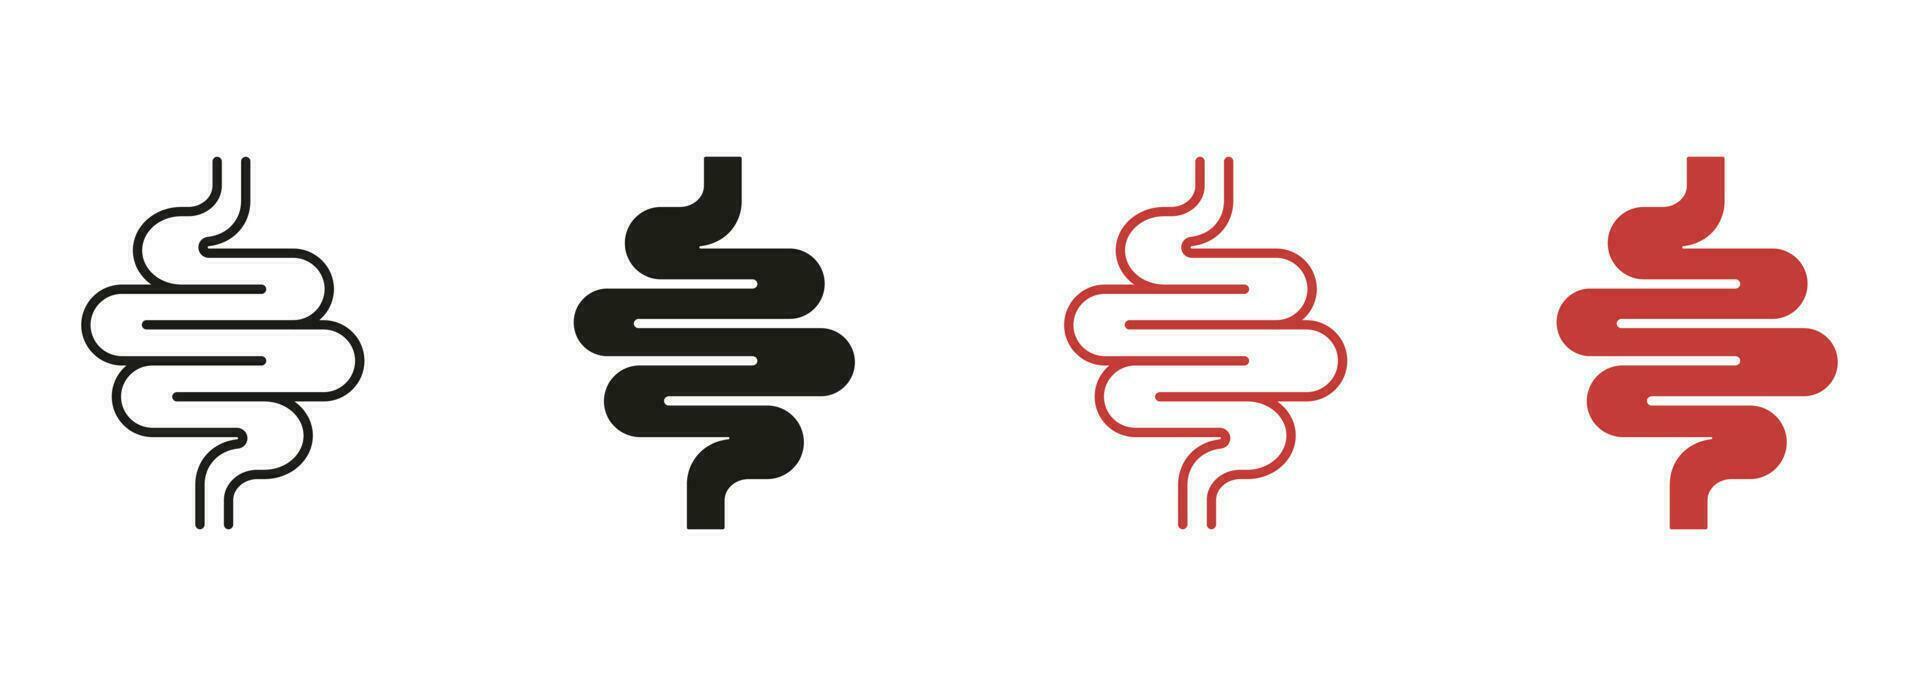 Intestine Line and Silhouette Color Icon Set. Health Colon, Small Gut, Bowel, Human Digestive System Pictogram. Gastrointestinal Inflammation Symbol Collection. Isolated Vector Illustration.